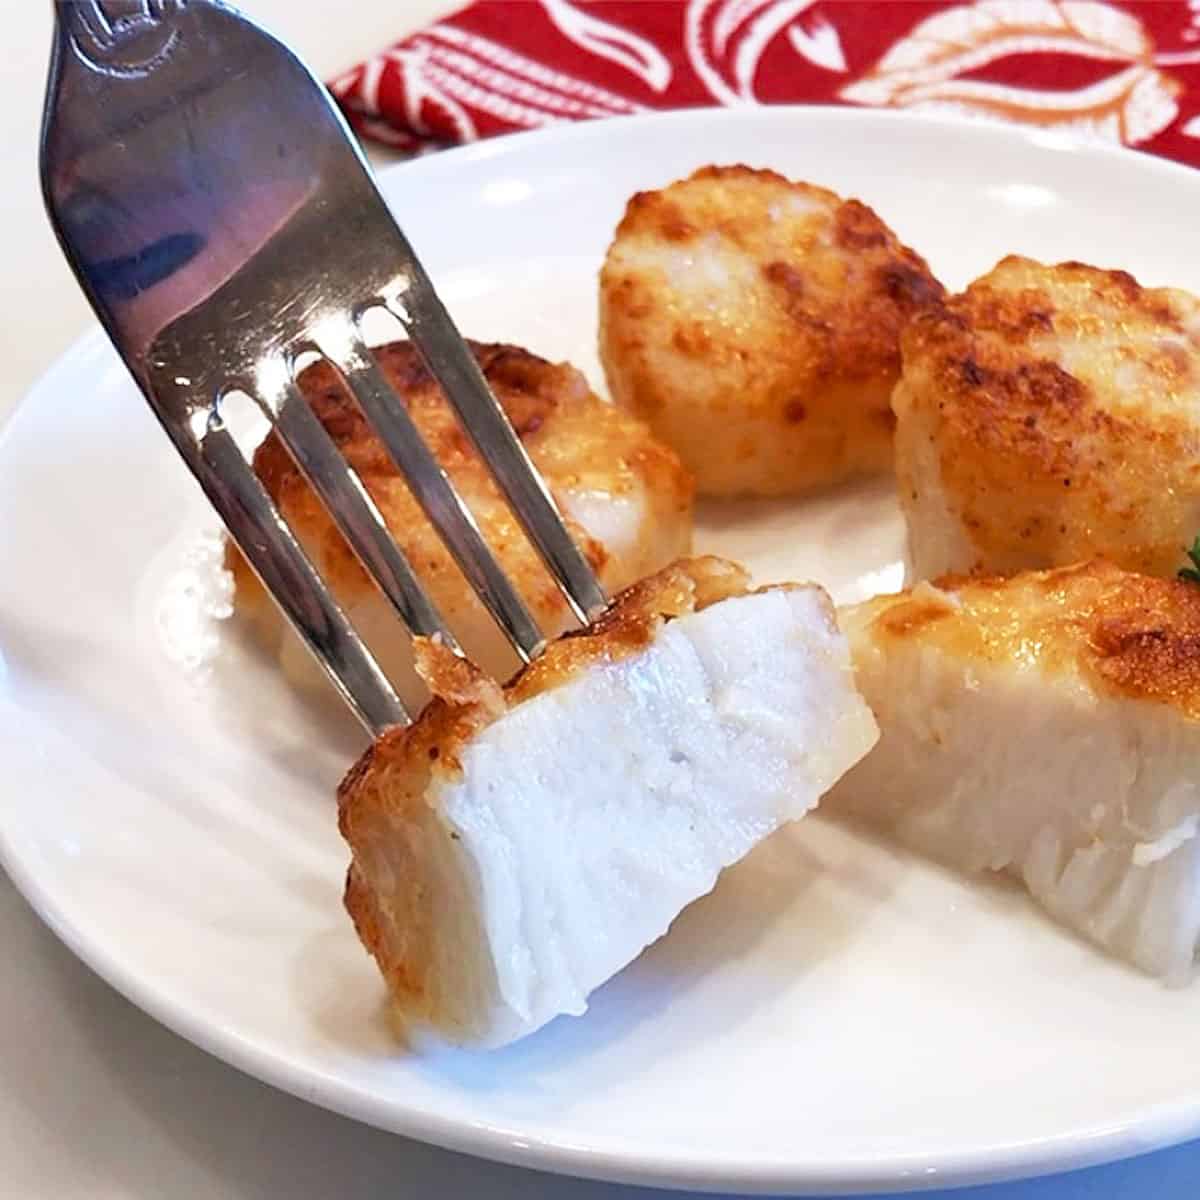 A halved scallop with a white, moist center. 